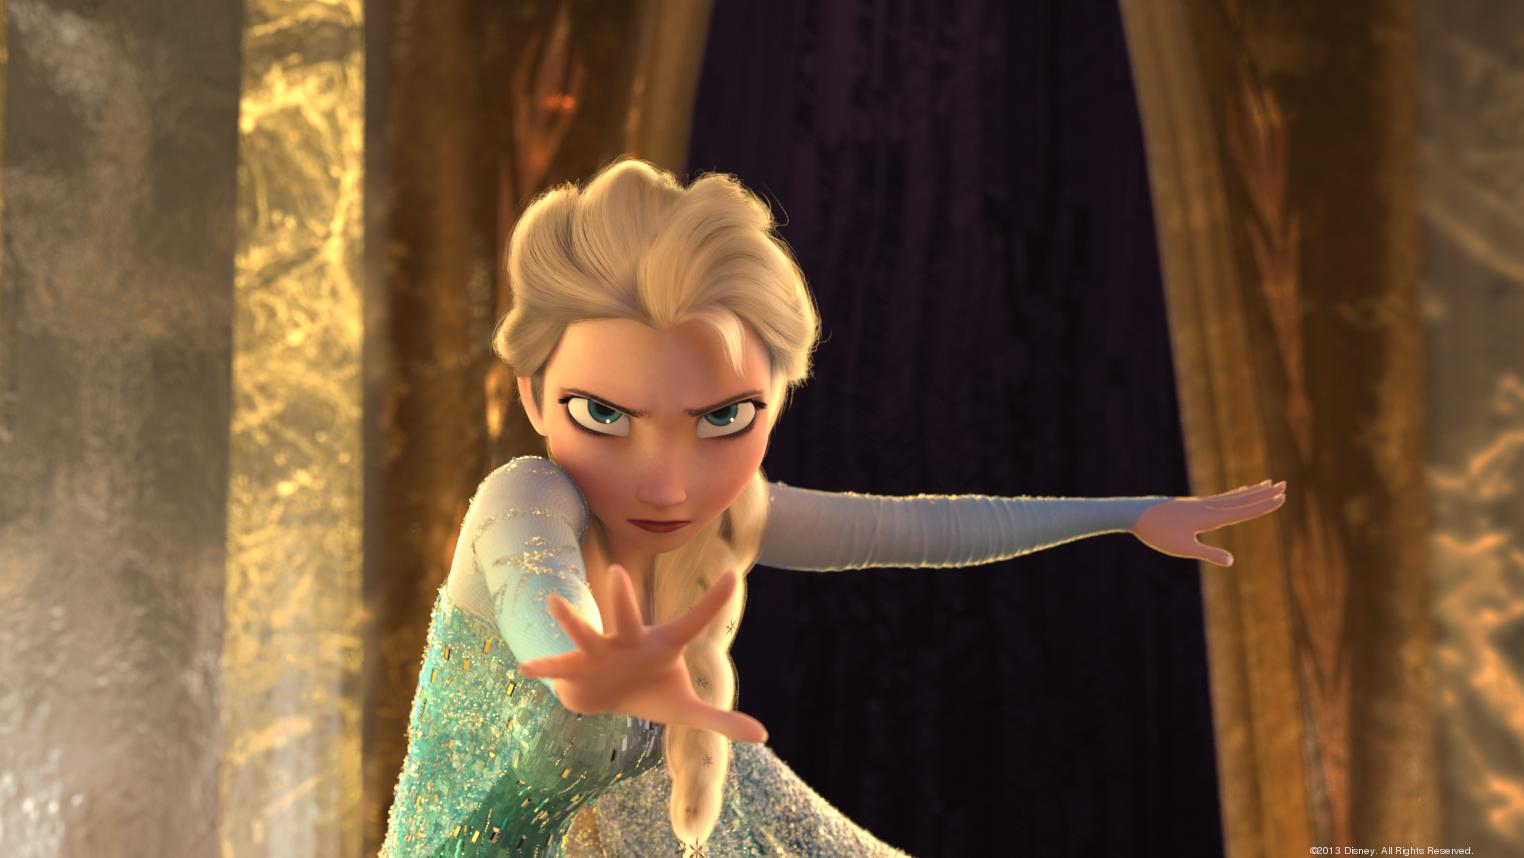 Frozen is now a worldwide phenomenon, but it’s Elsa who has taken center stage